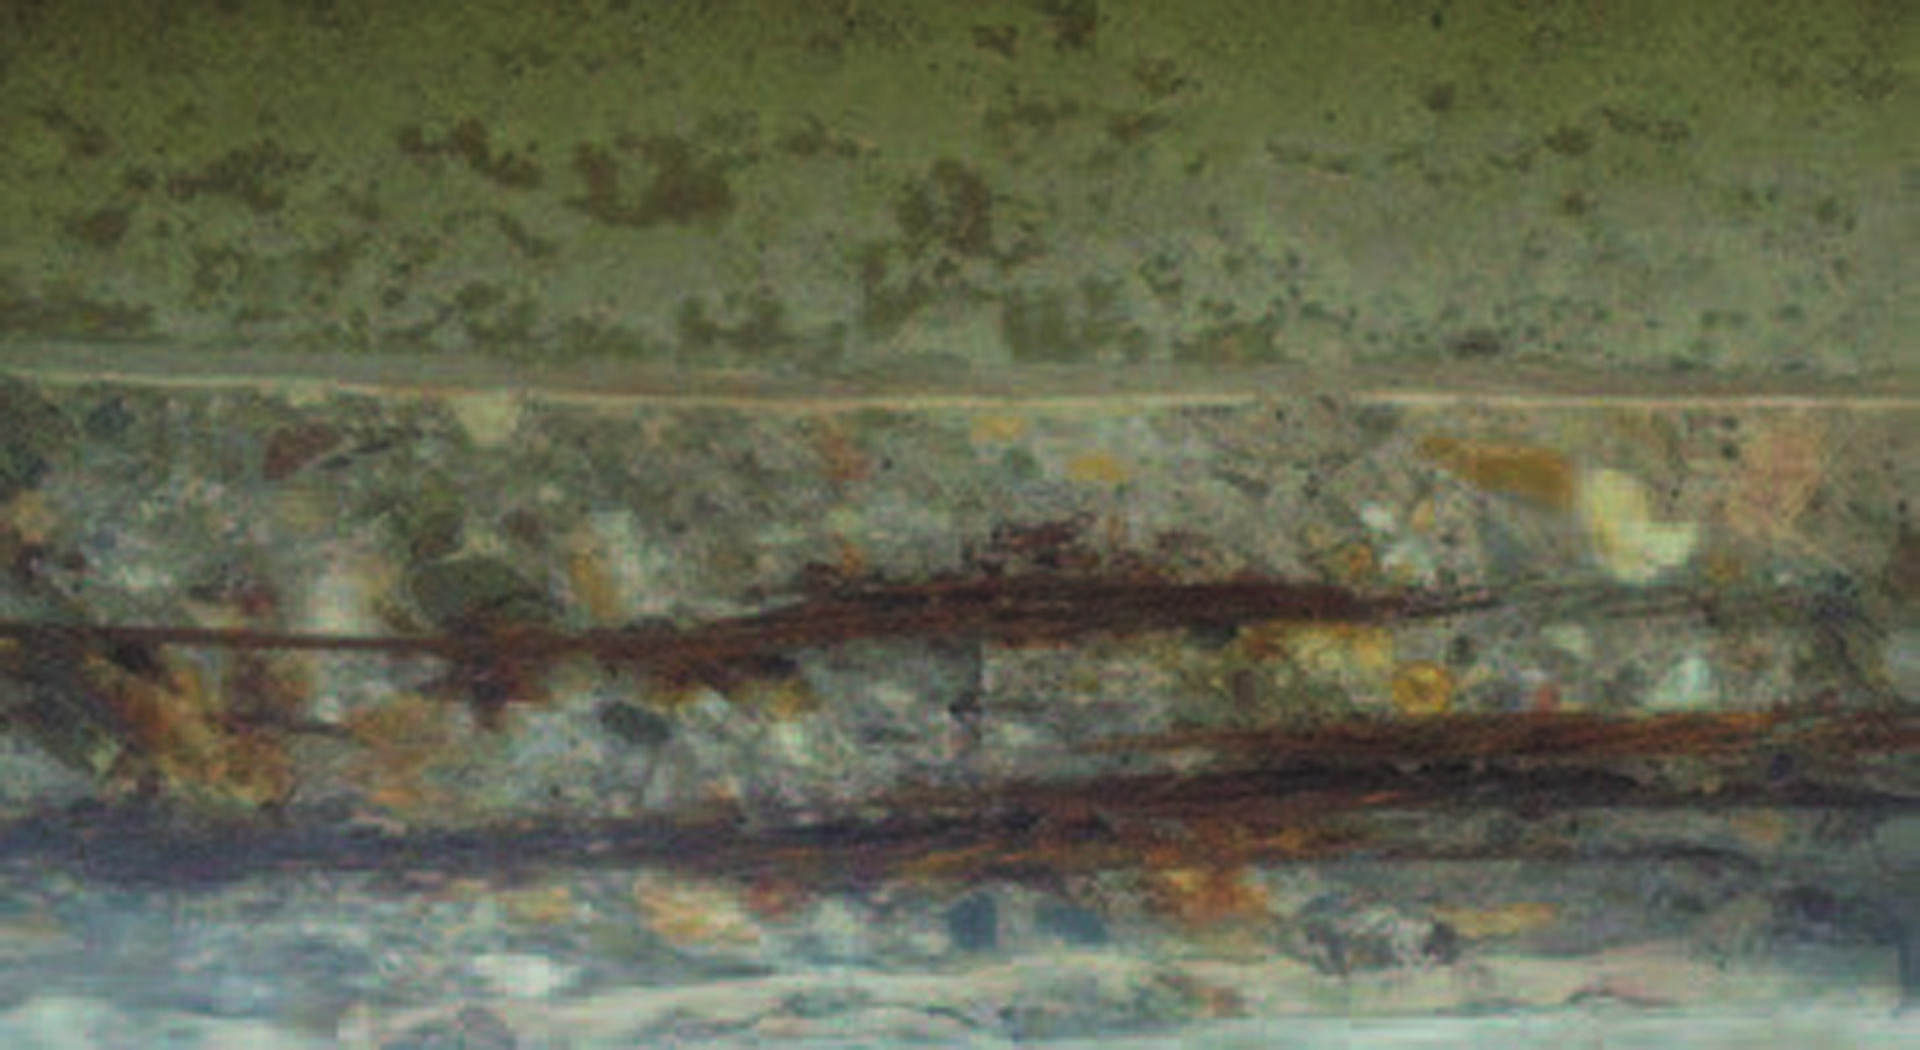 Concrete spalling and corrosion